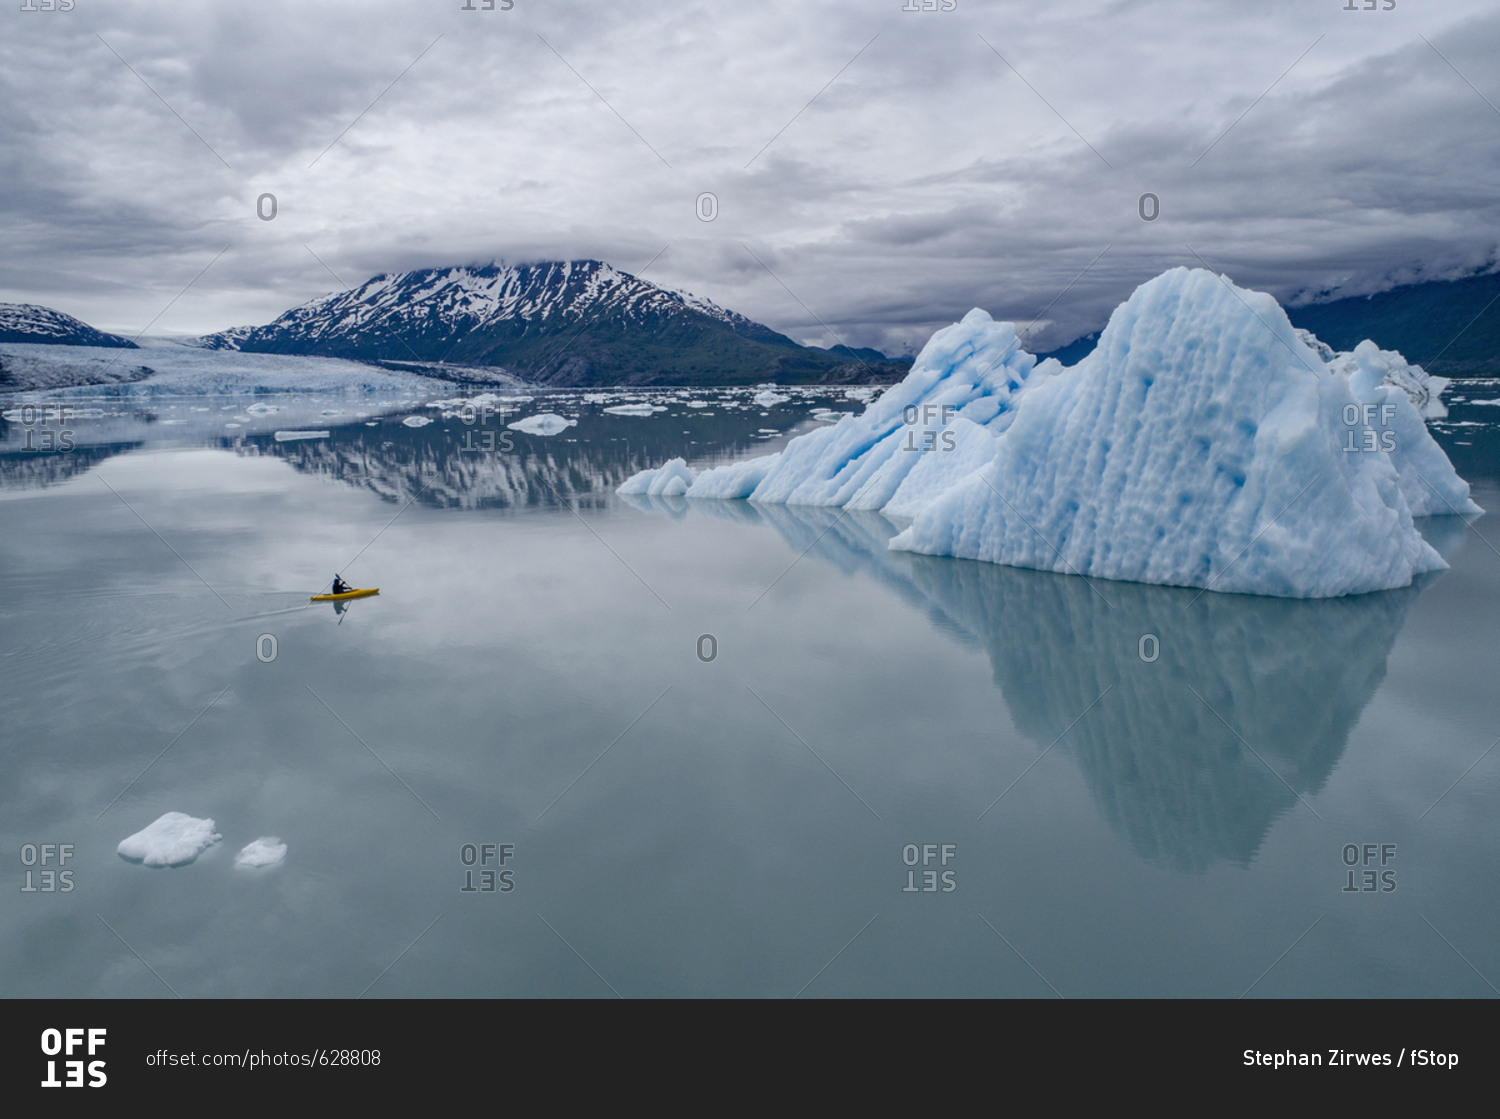 Person canoeing in lagoon by icebergs against cloudy sky, Lake George, Palmer, Alaska, USA